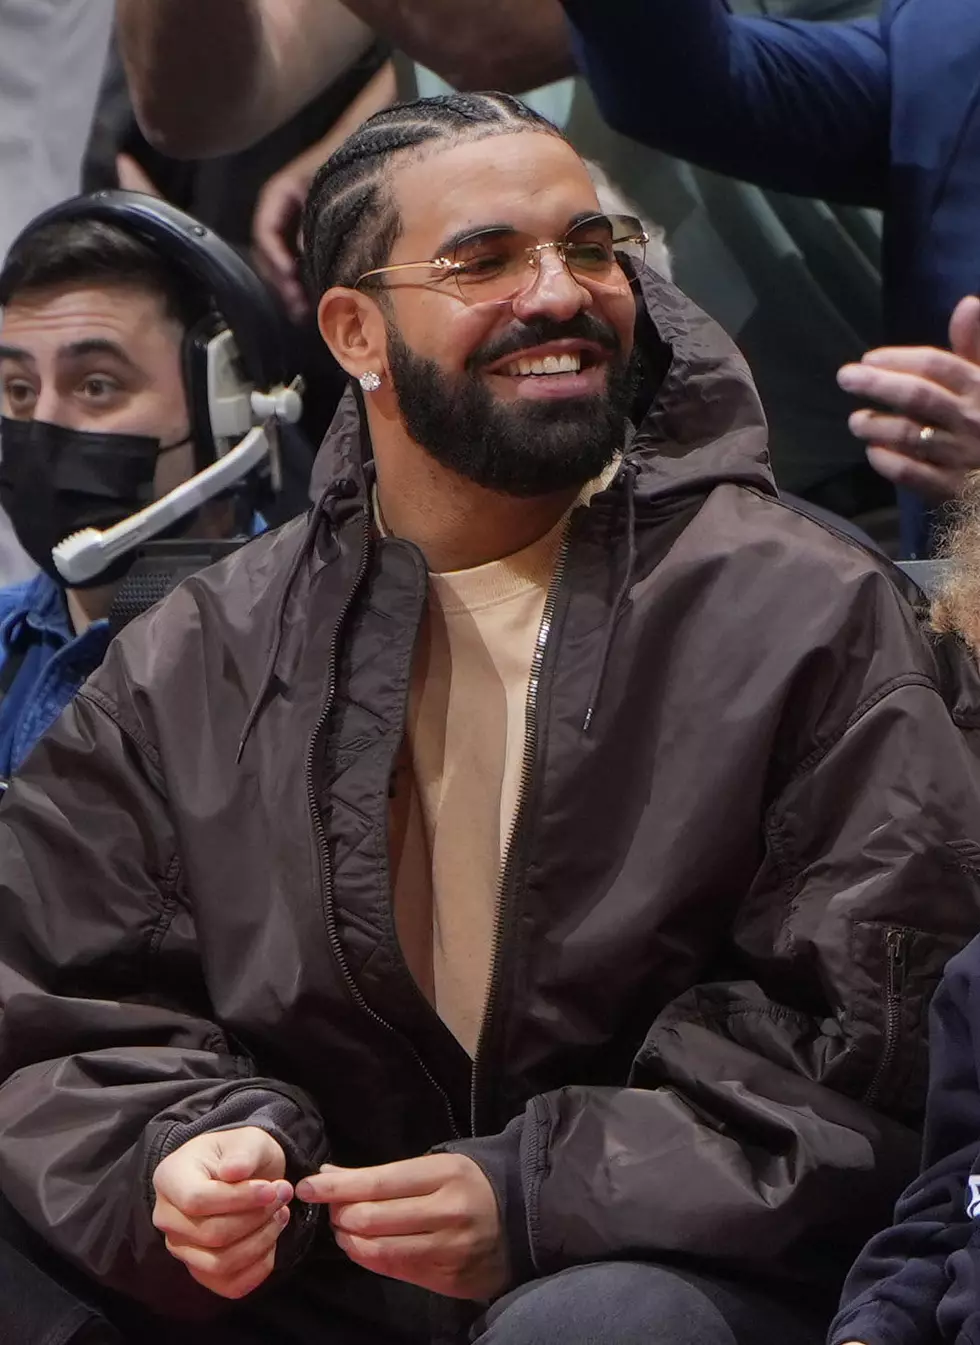 Rapper, Drake and Fuse News Host, Matte Babel, look on while attending the  Round 1 Game 5 of the 2022 NBA Playoffs between the Philadelphia 76ers and the Toronto Raptors on April 28, 2022 at the Scotiabank Arena in Toronto, Ontario, Canada.